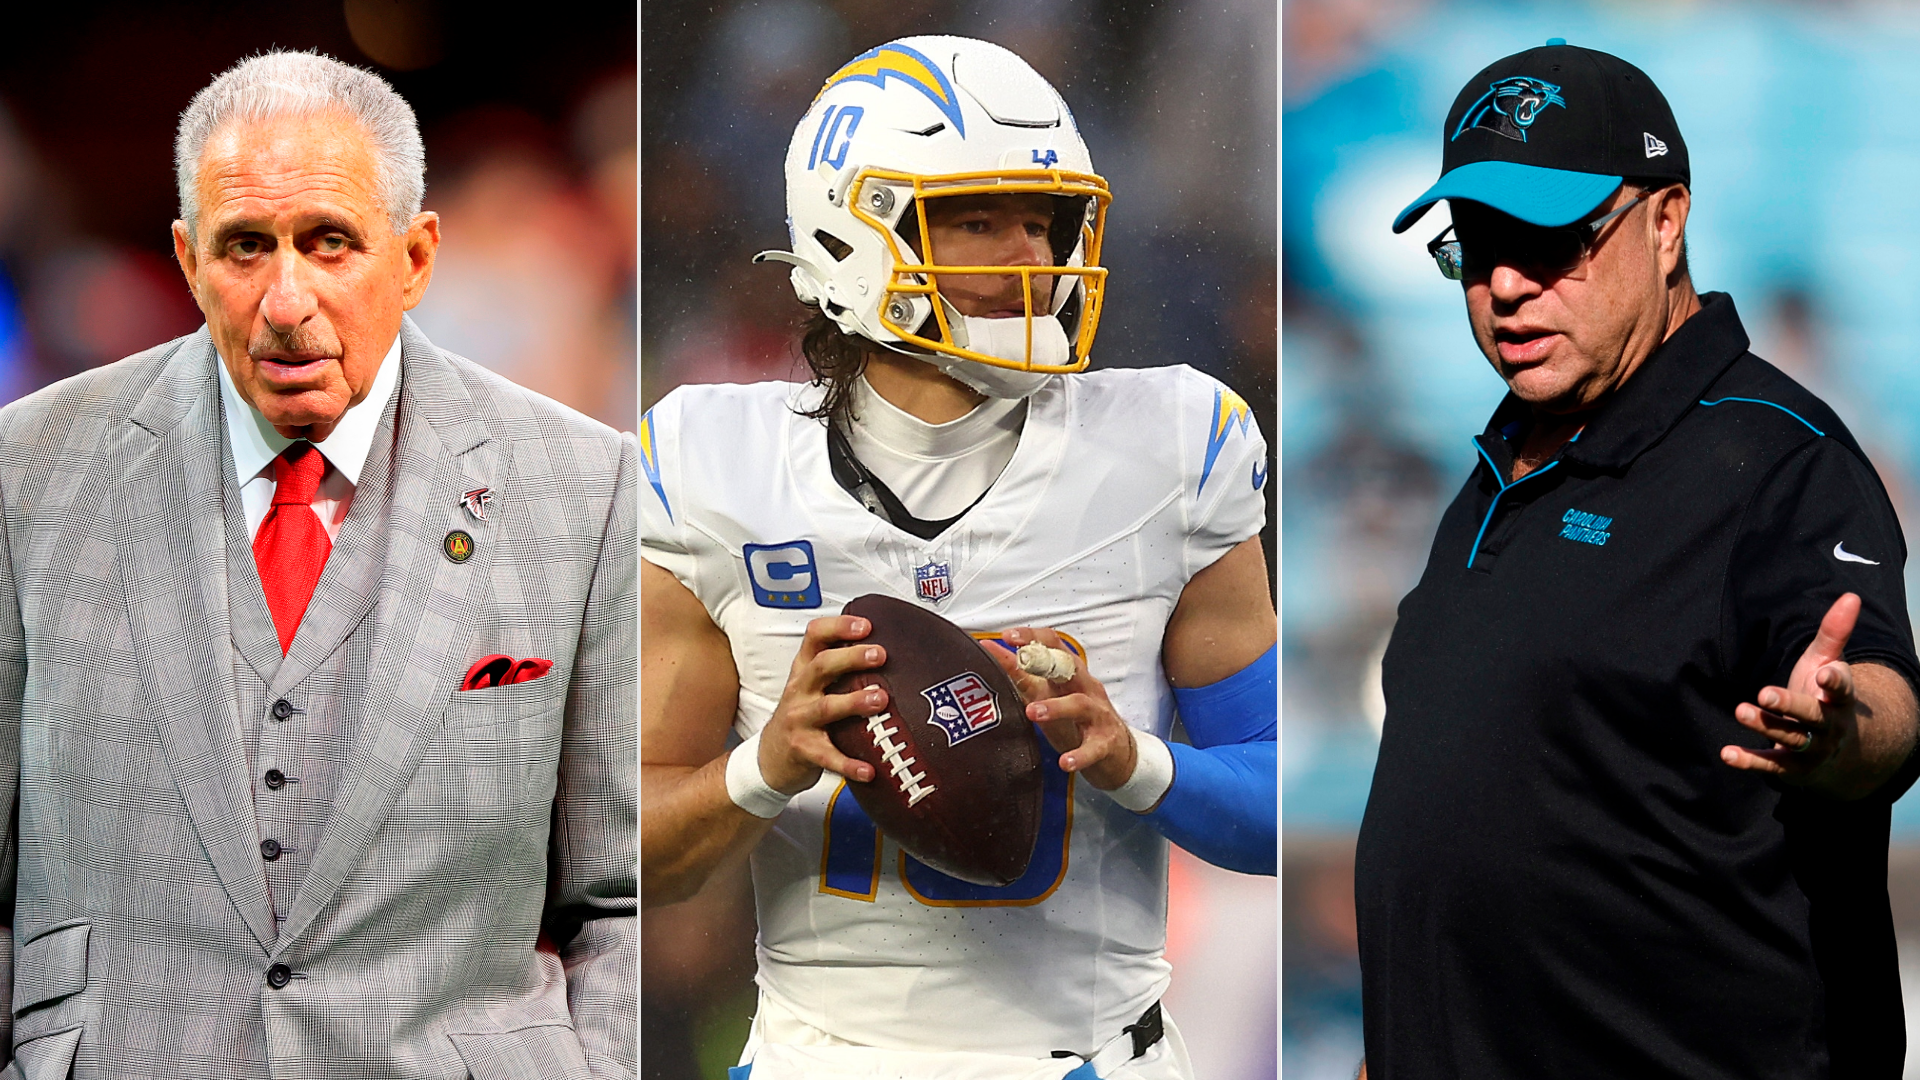 ranking the nfl's open head coaching jobs, from best (falcons) to worst (panthers)